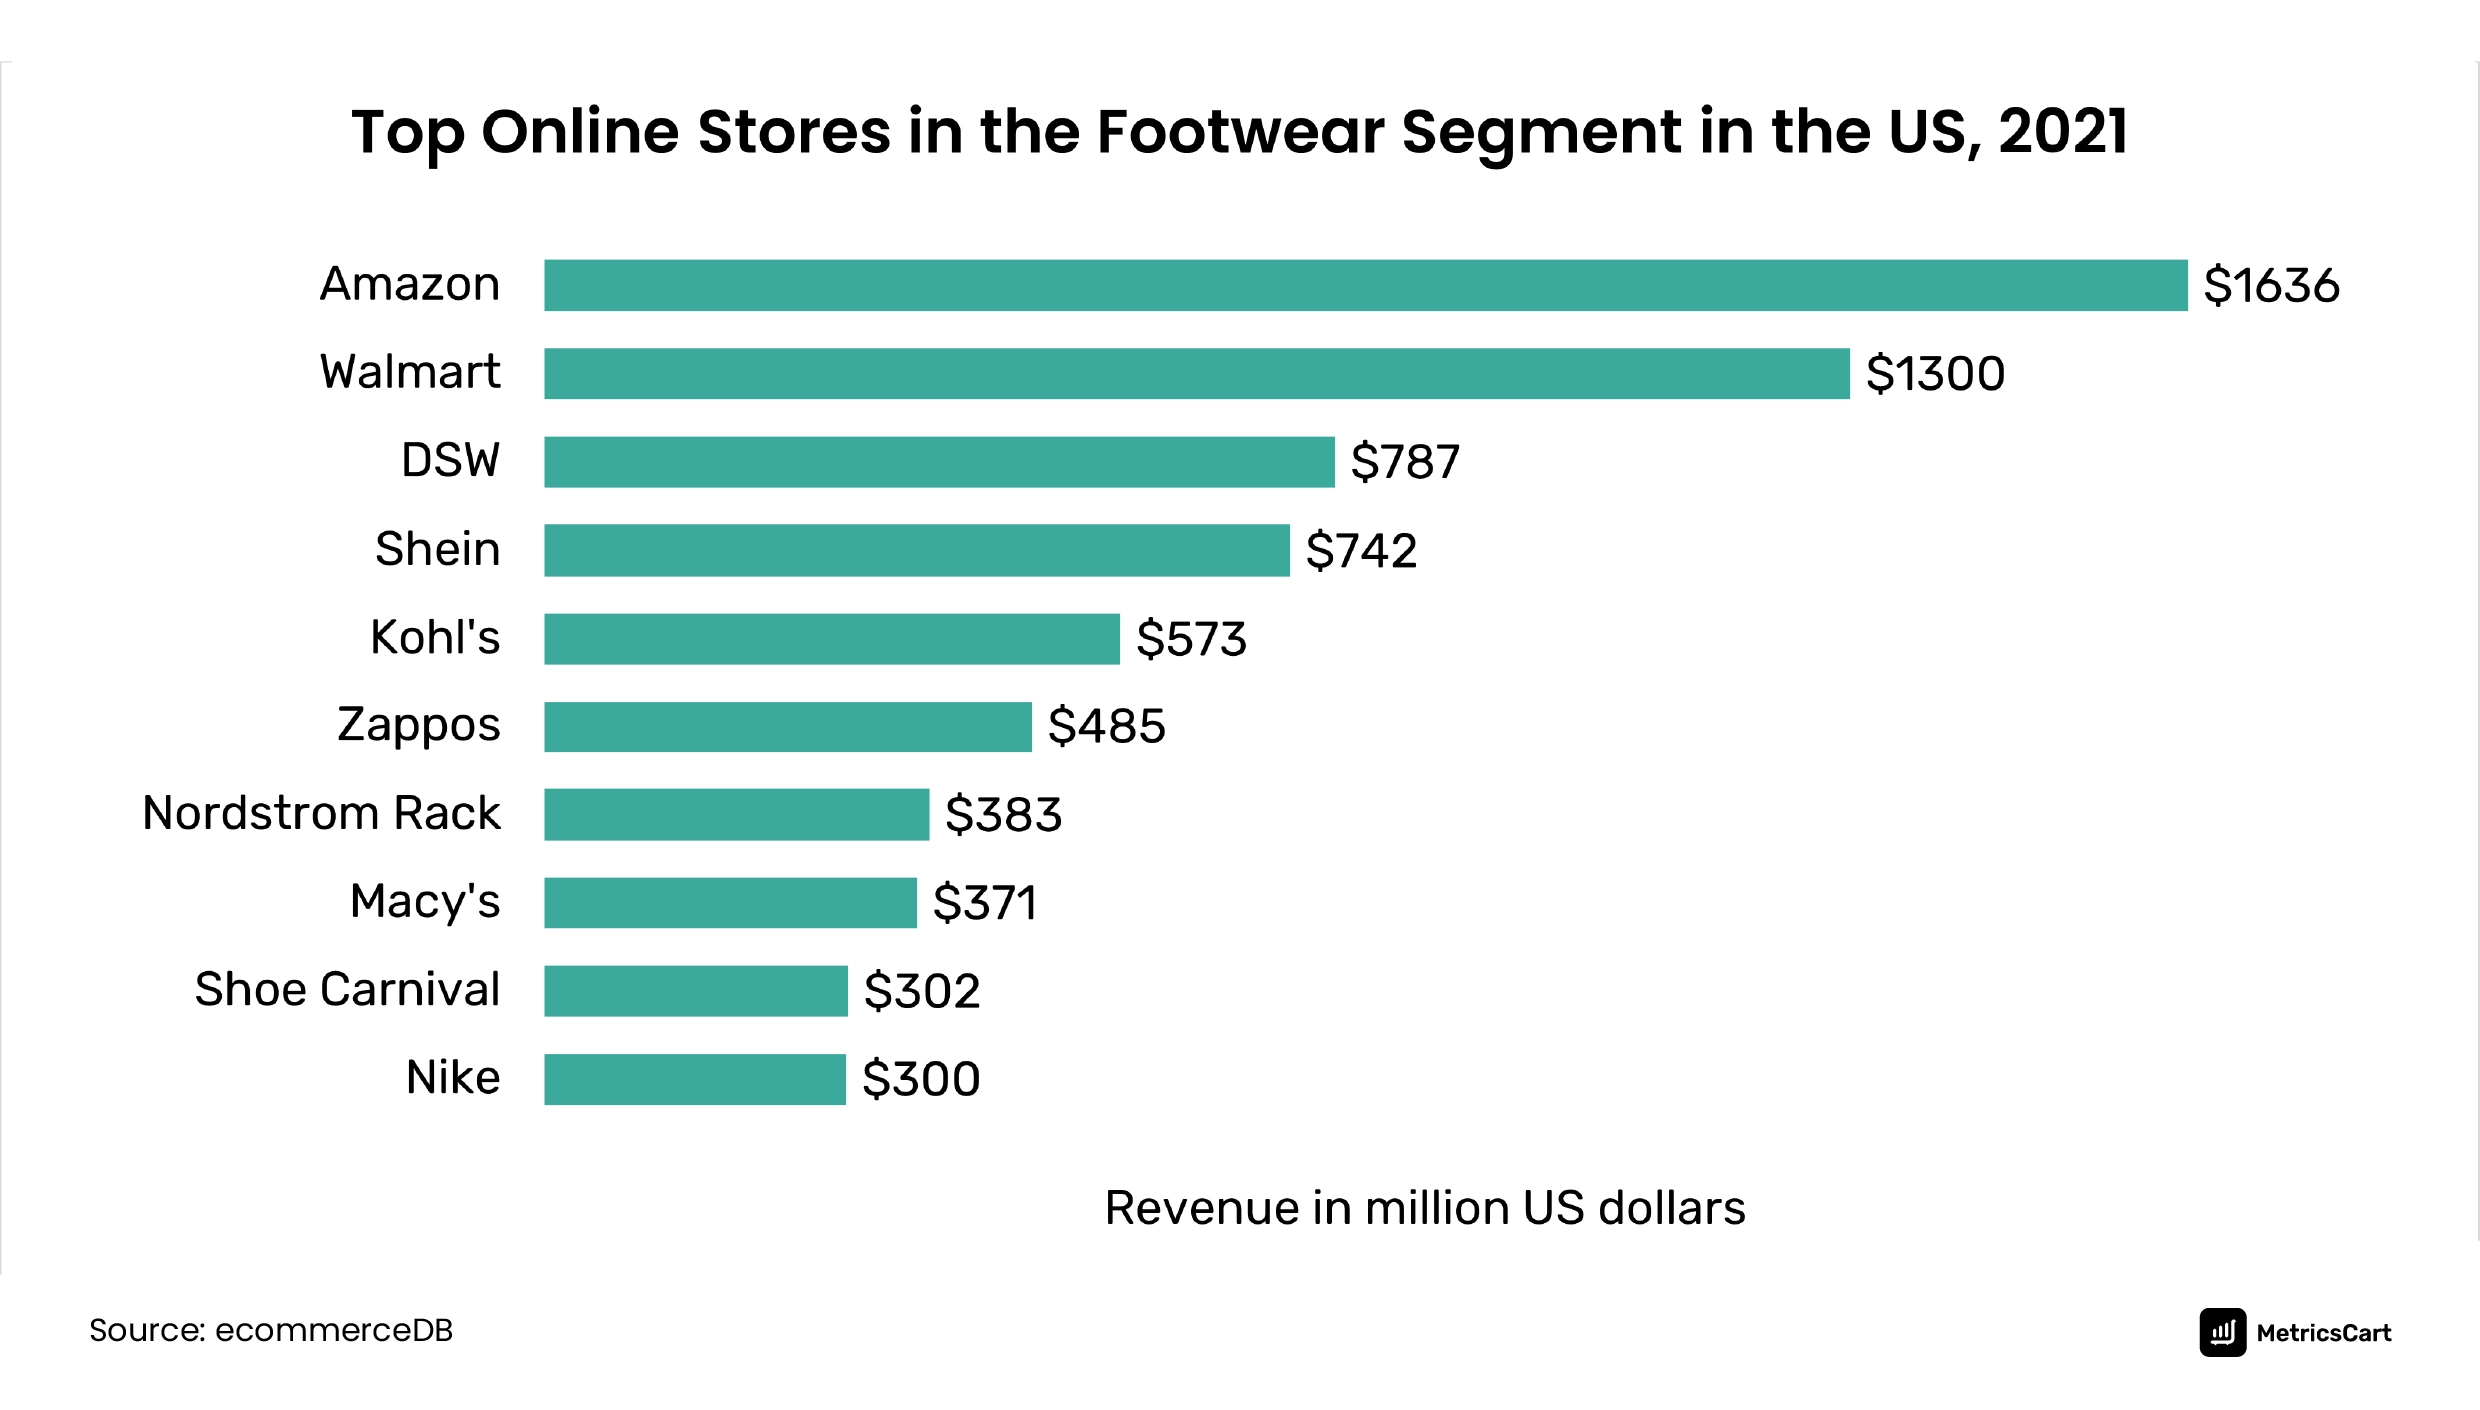 chart showing top online stores in the footwear segment in the US